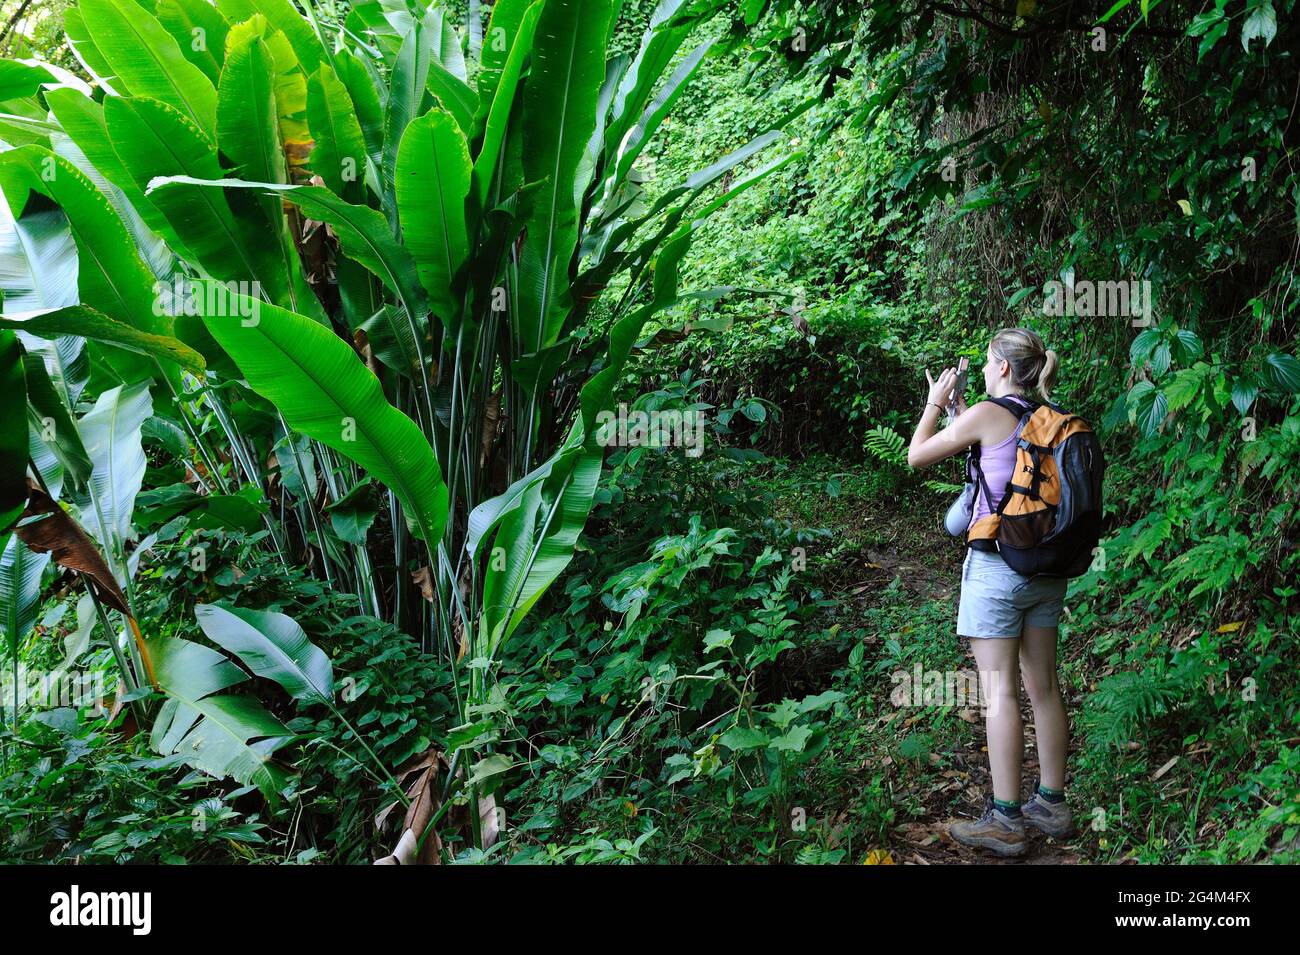 FRANCE. MARTINIQUE. HAKER IN TROPICAL FOREST Stock Photo